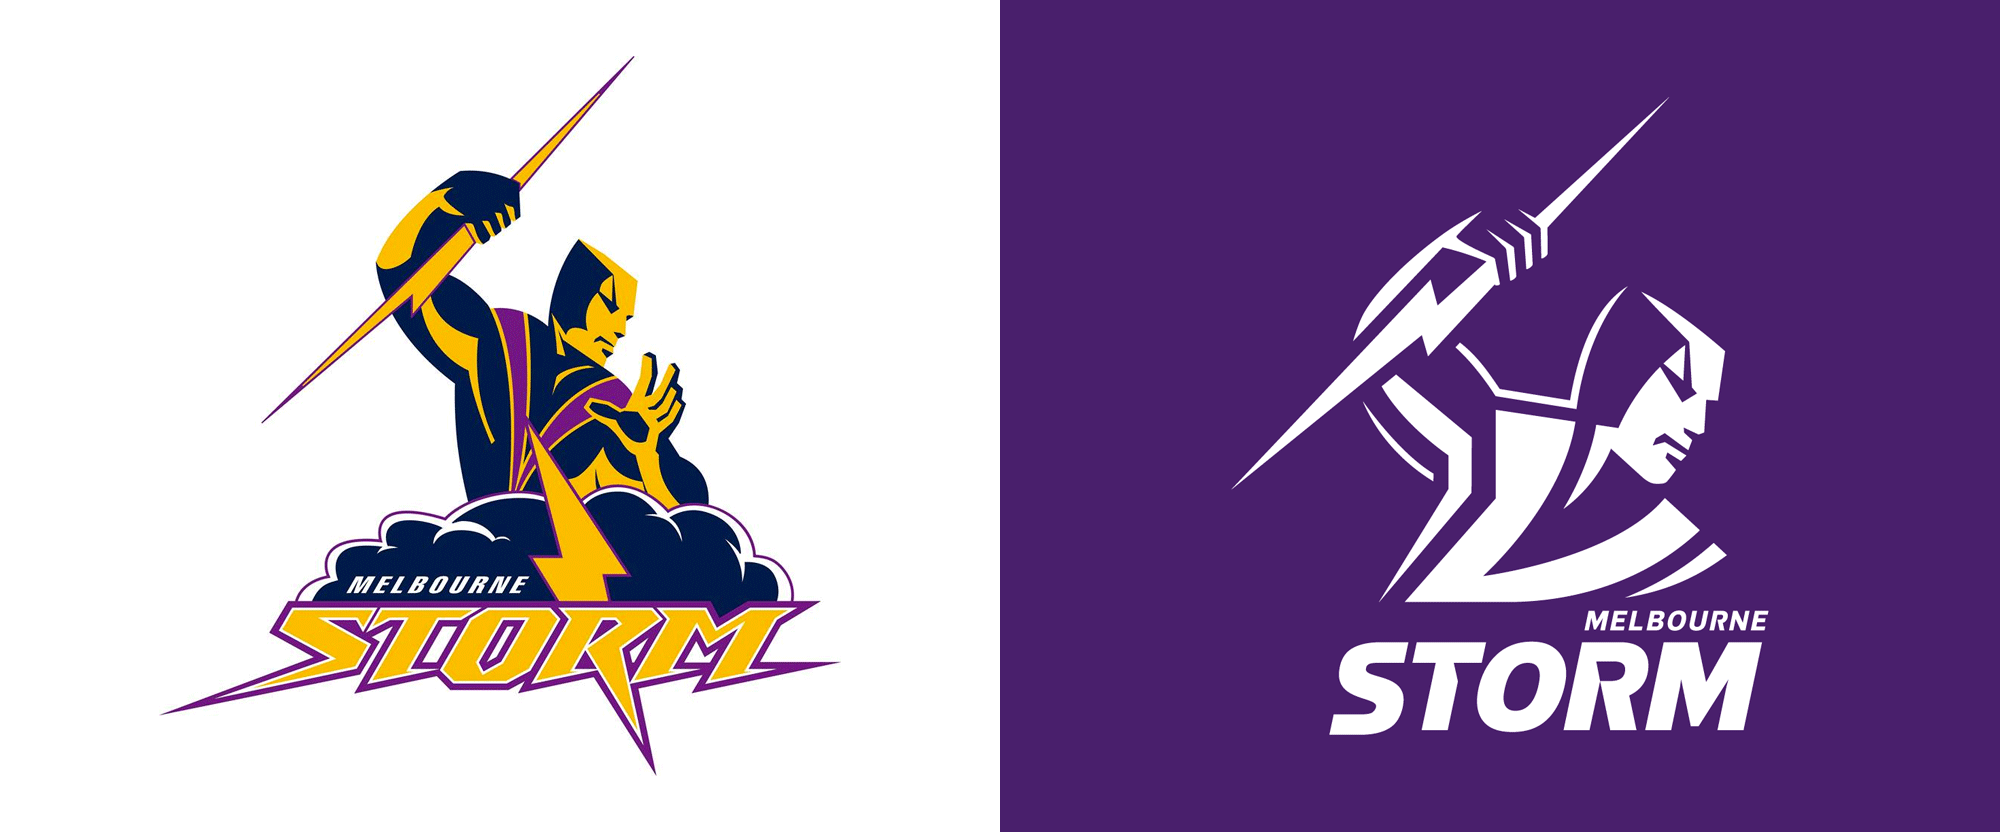 Melbourne Logo - Brand New: New Logo for Melbourne Storm by WiteKite